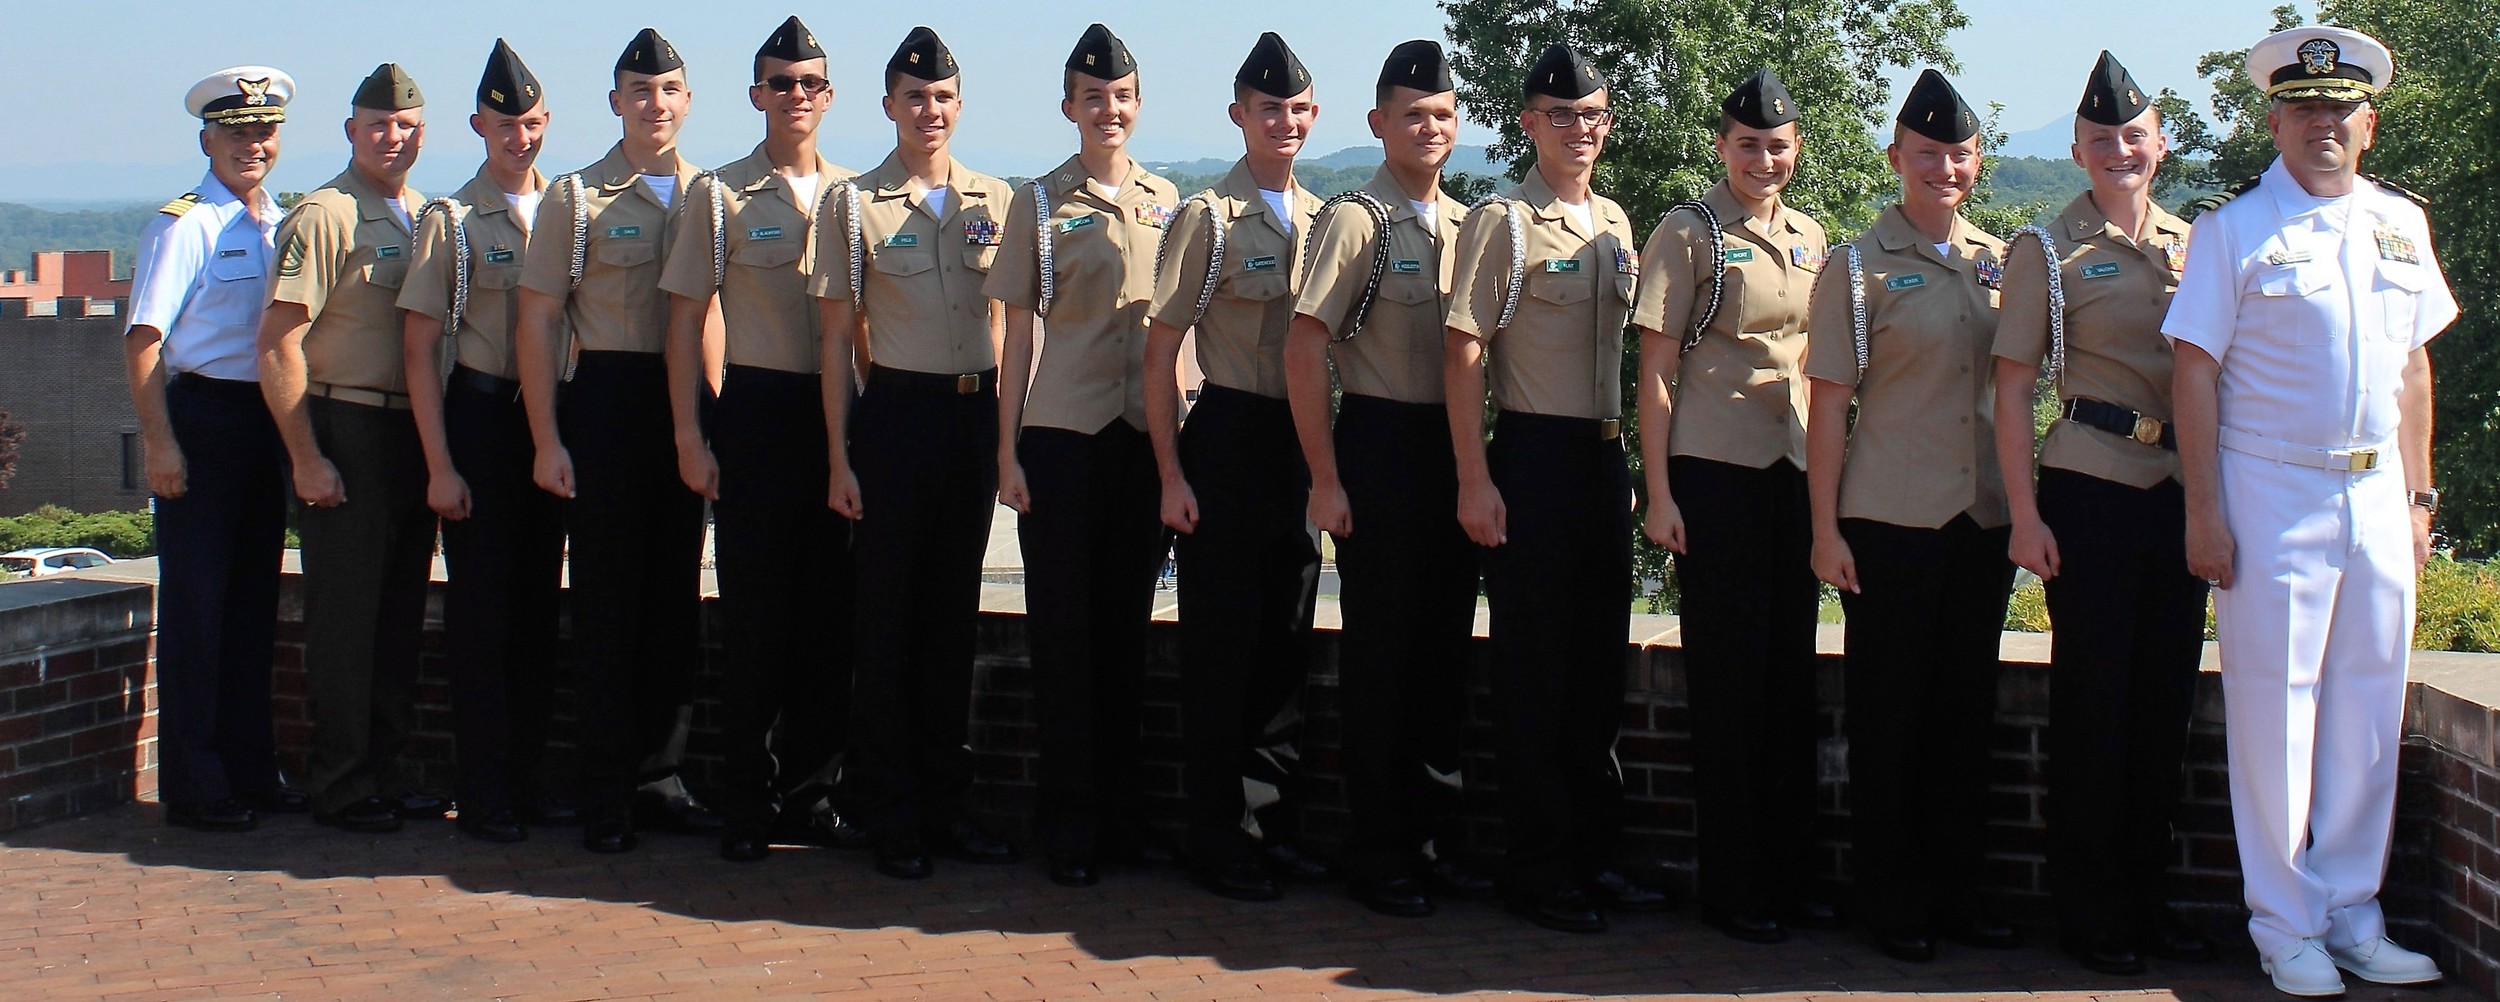 Nease NJROTC instructors and cadets participated in the seven-day Area-12 Leadership Academy and CO/XO School at Riverside Military Academy in Gainesville, Georgia. Standing (l-r) Captain Scott LaRochelle, Gunnery Sergeant Duane Hanson, Cadets Ryan Berry, Mac Davis, Justin Blackford, Lucas Pels, Isabelle Jacobi, Jesse Gatewood, Anthony Huddleston, Jacob Hunt, Aberlyn Short, Krista Ecker, Cali Vaughn and Area-12 Manager Commander Rustie Hibbard.